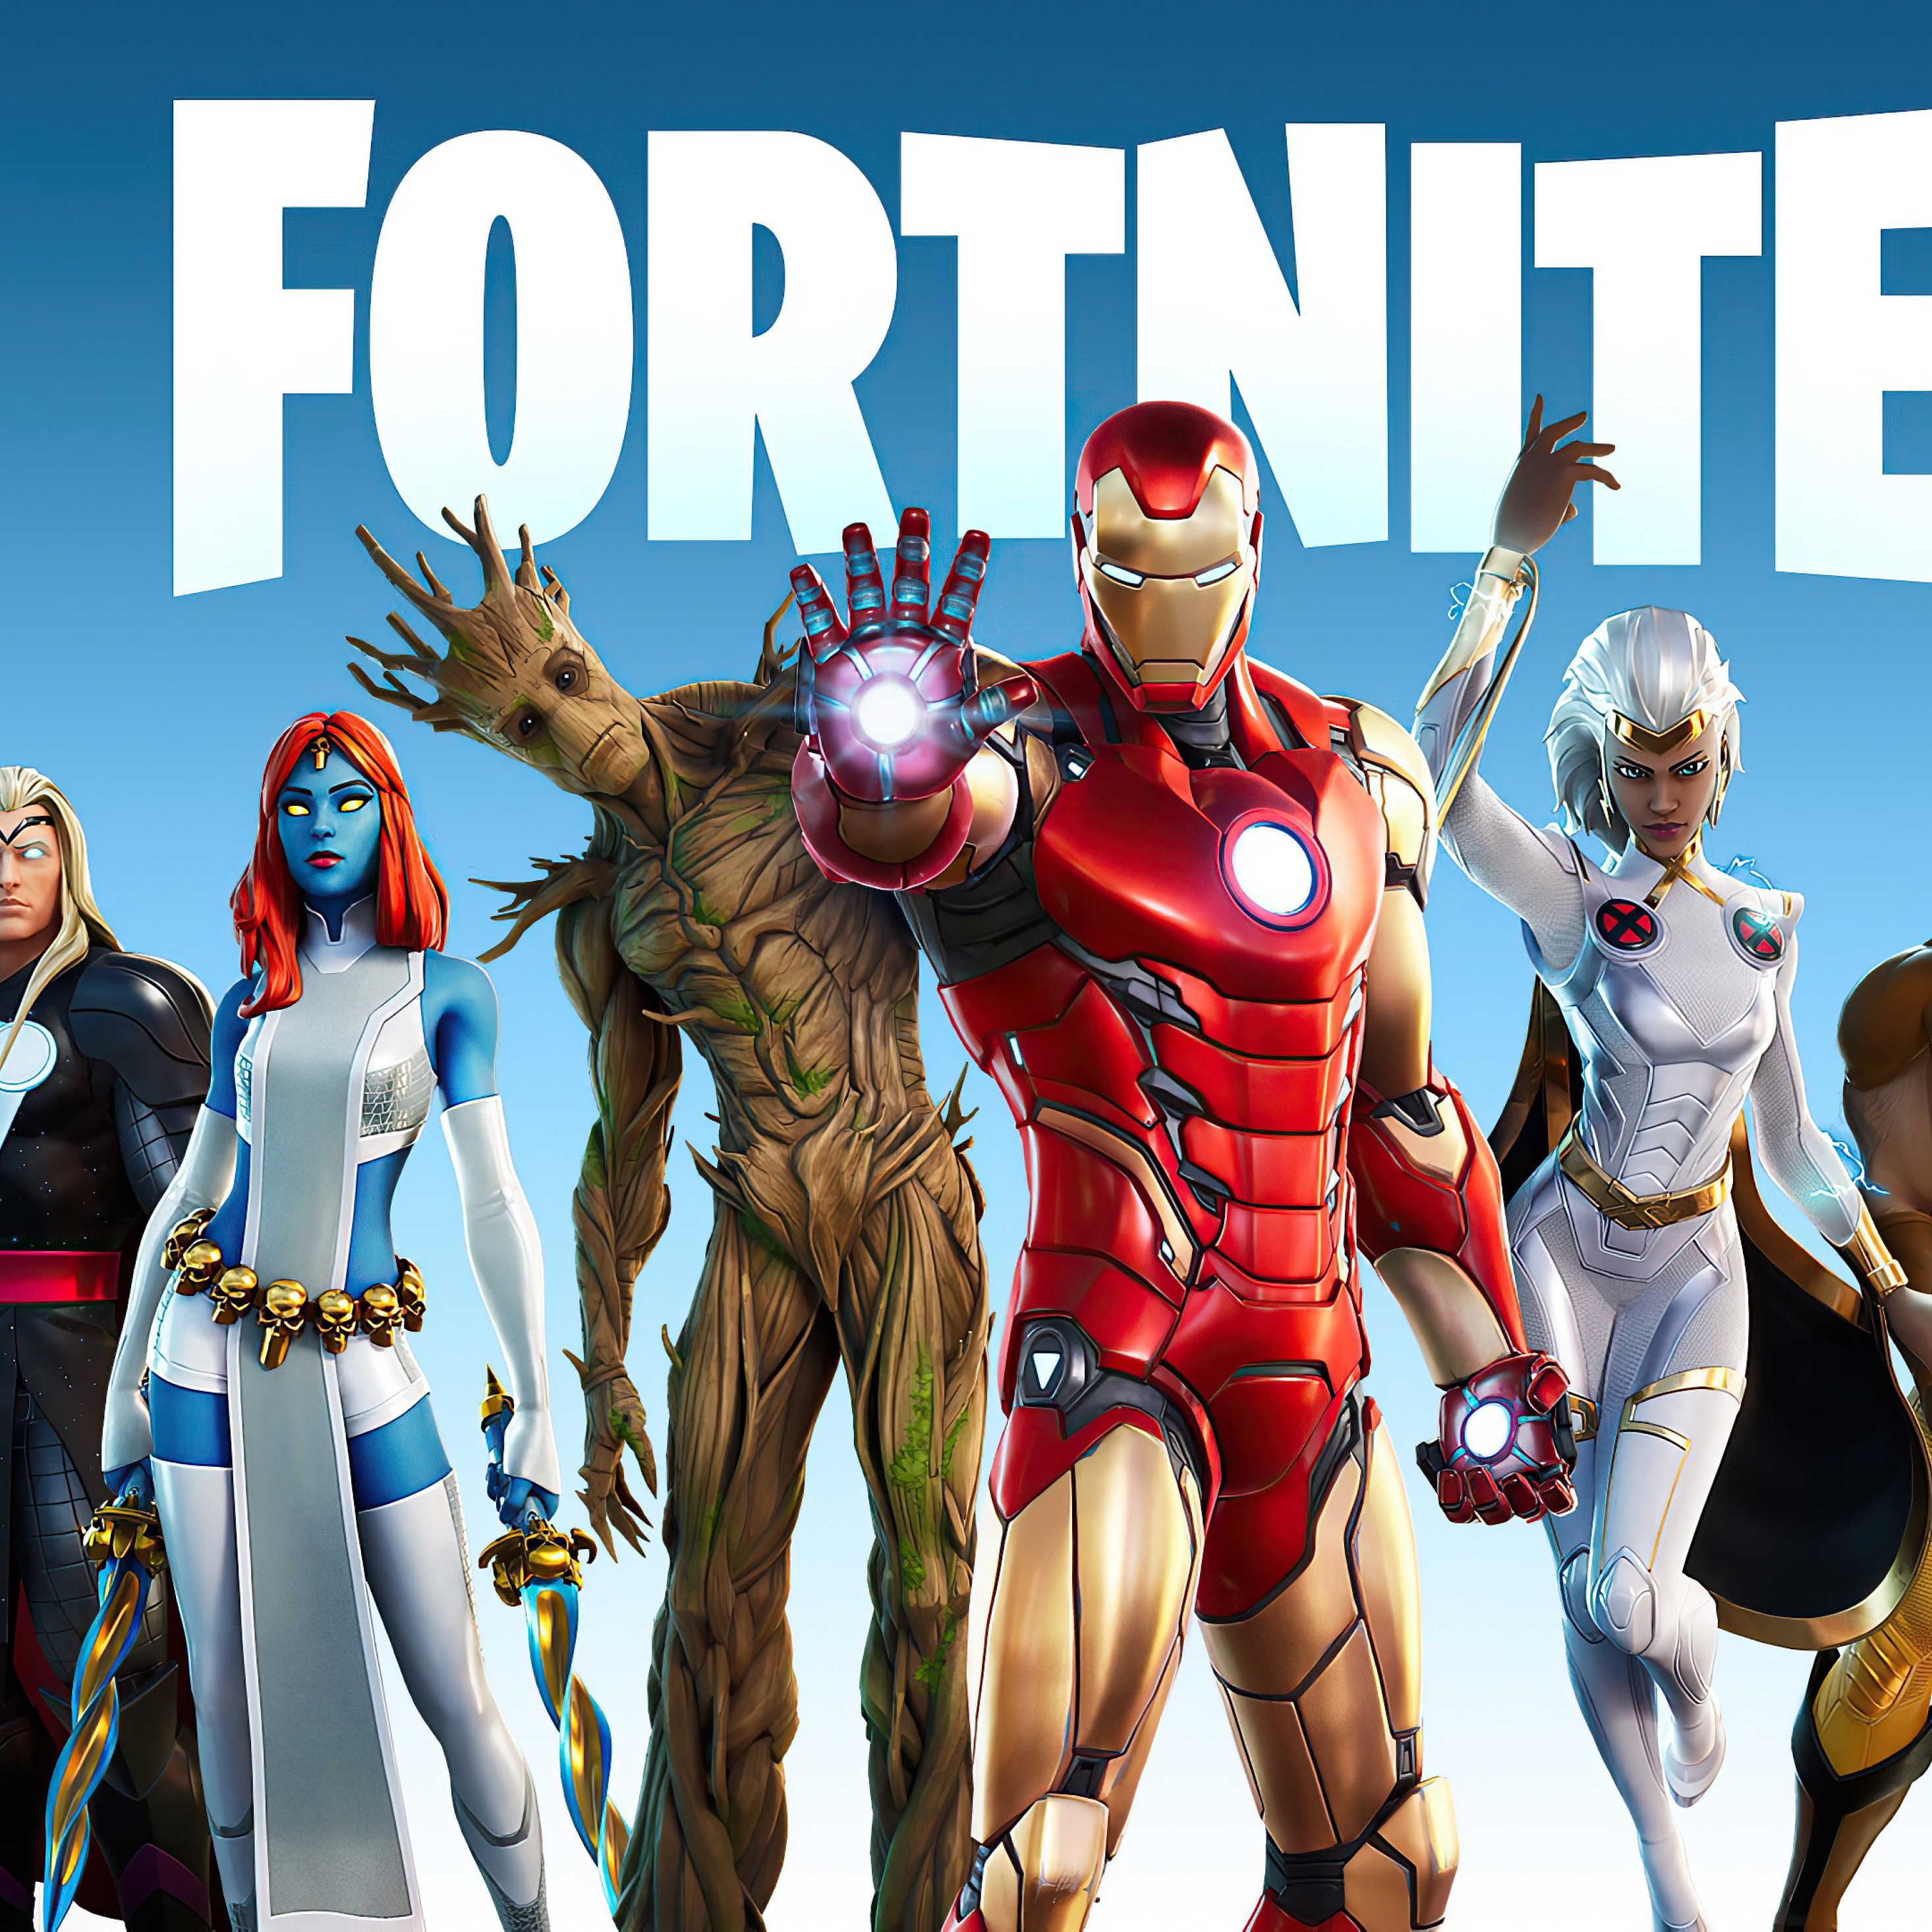 Featured image of post Fortnite Wallpaper Ipad : Fortnite wallpapers 4k hd for desktop, iphone, pc, laptop, computer, android phone, smartphone, imac, macbook wallpapers in ultra hd 4k 3840x2160, 1920x1080 high definition resolutions.